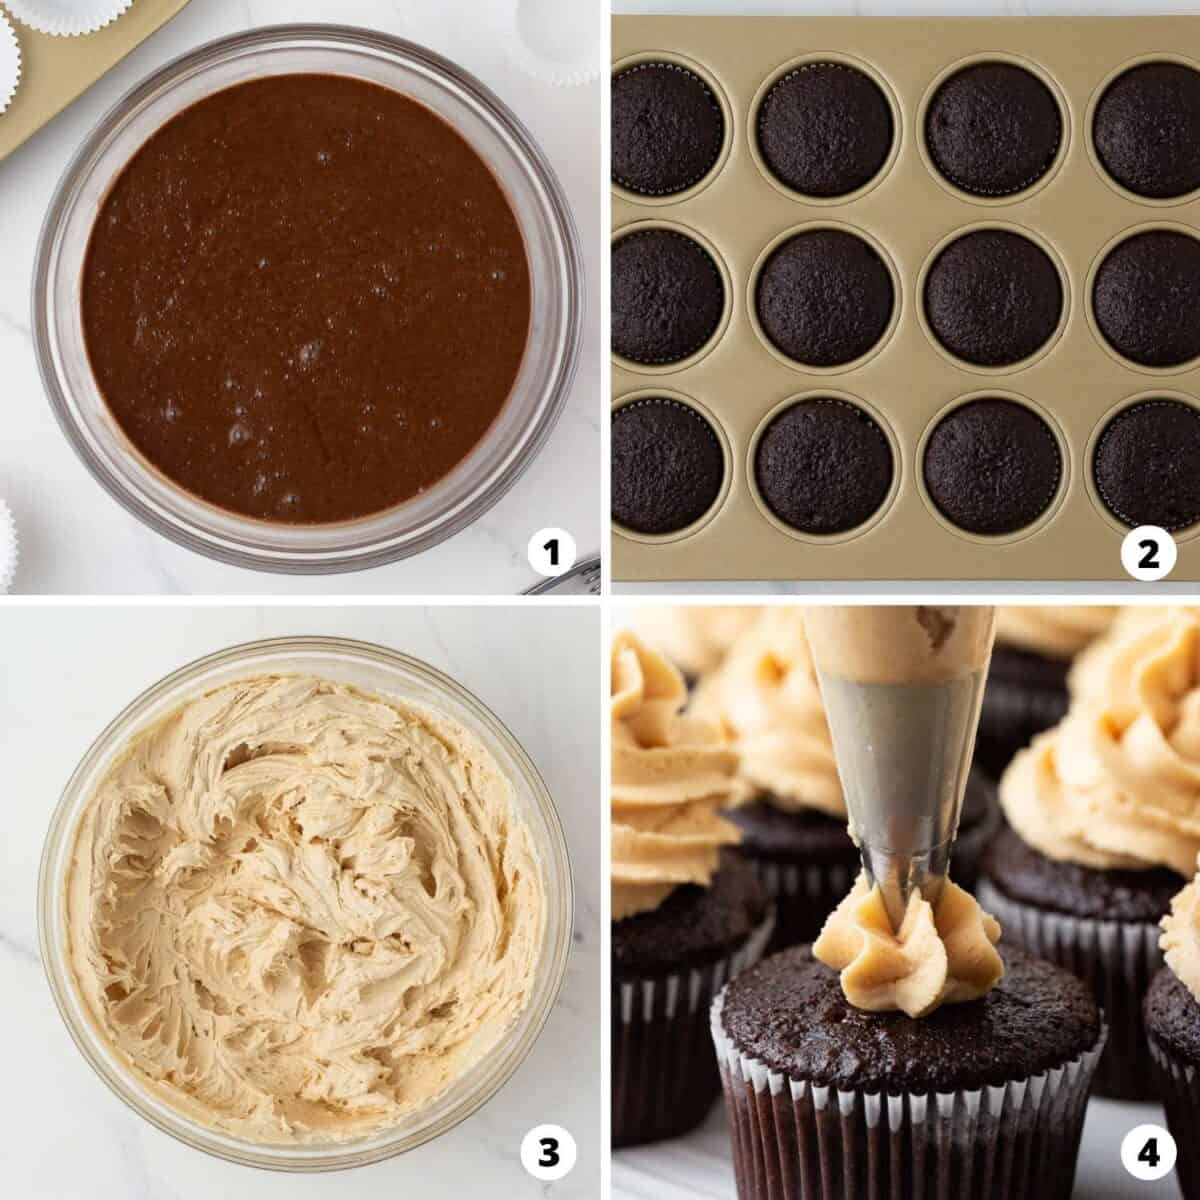 Step by step collage showing how to make chocolate peanut butter cupcakes.